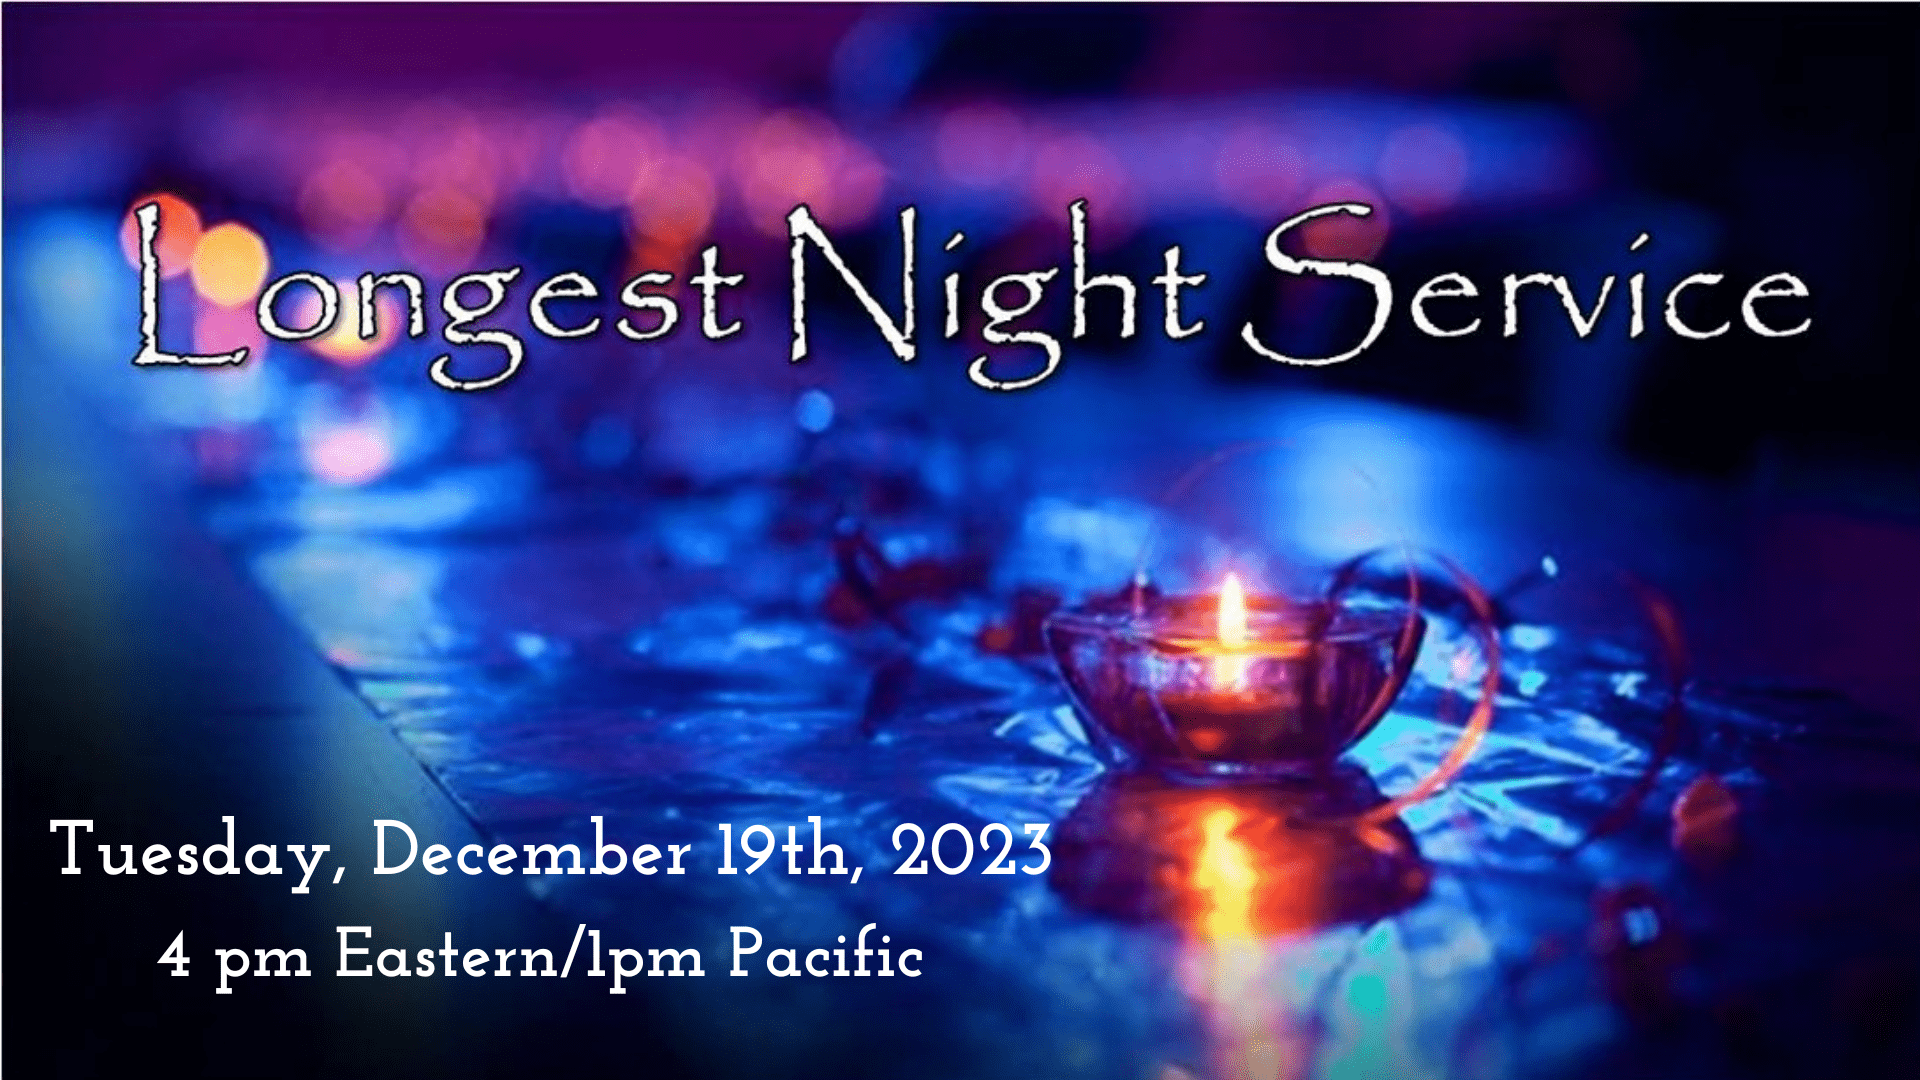 UKirk Longest Night Service Tuesday, December 19th@4pm Eastern/1pm Pacific